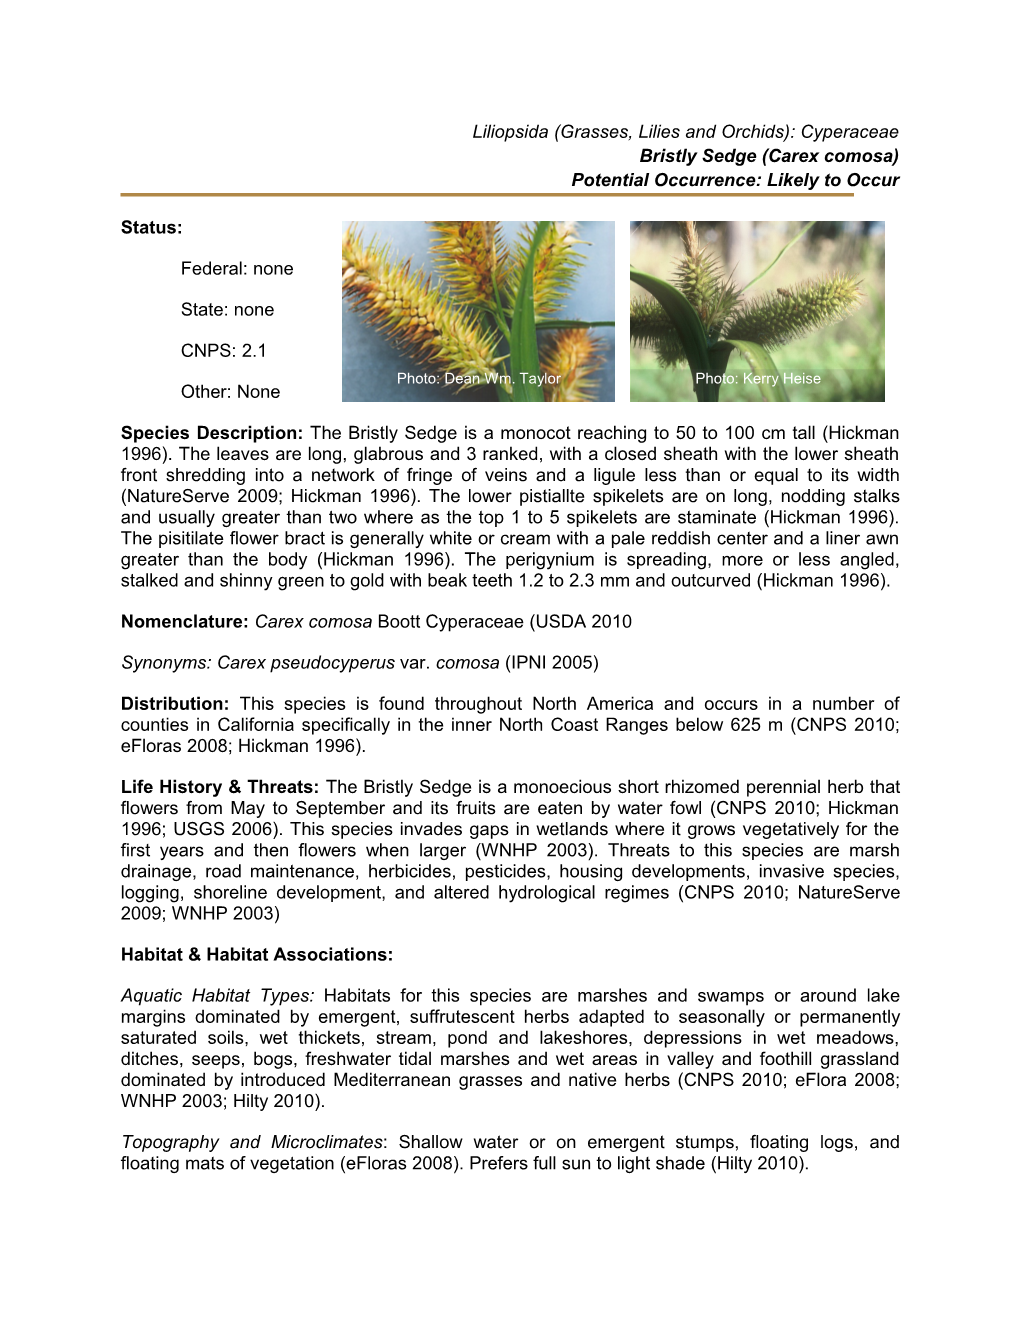 Liliopsida (Grasses, Lilies and Orchids): Cyperaceae